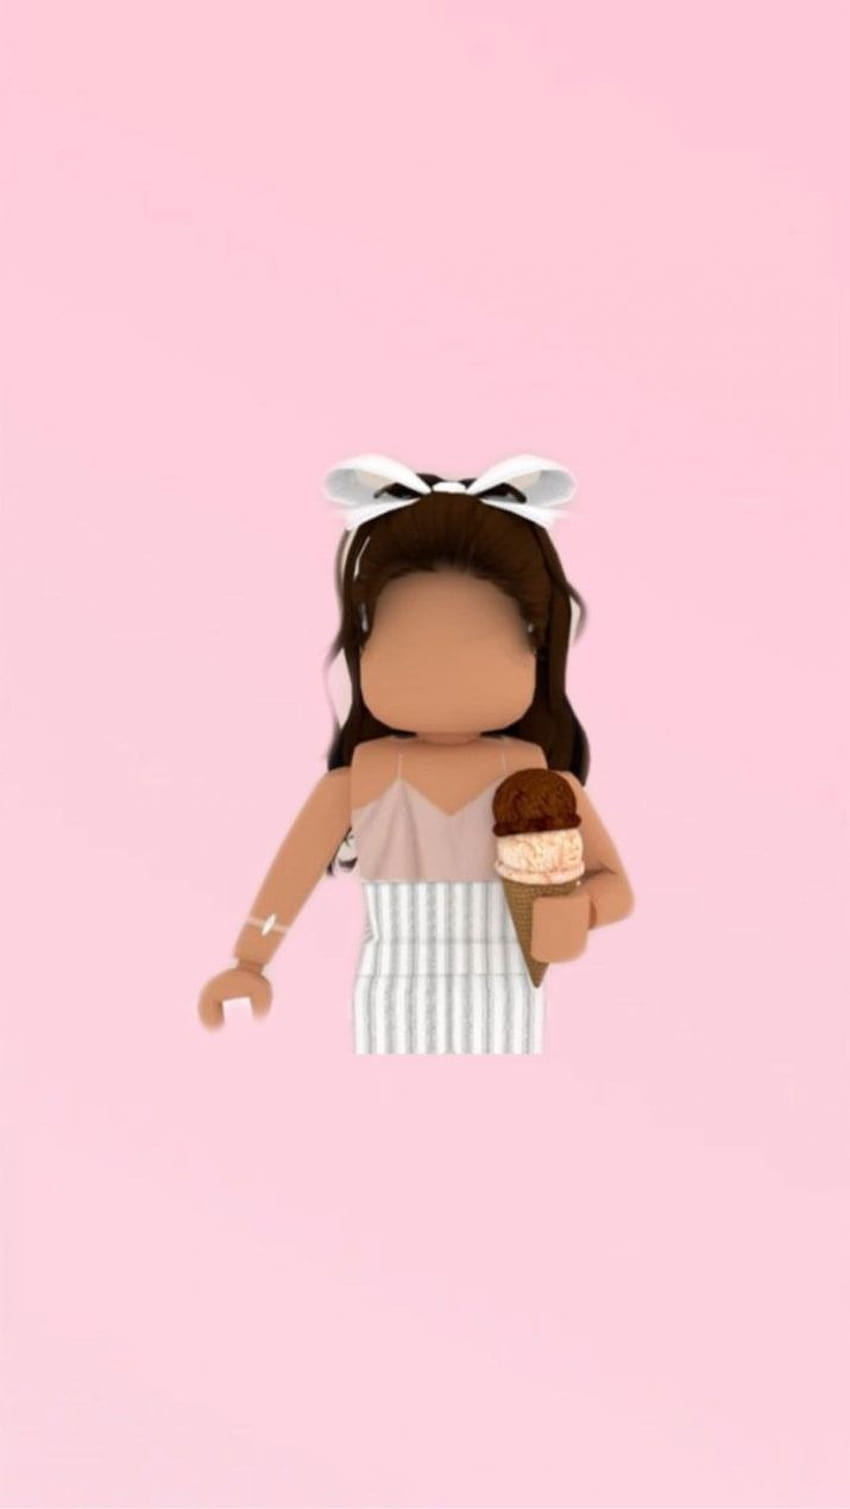 Download Aesthetic Roblox Girl In White Tube Top Wallpaper